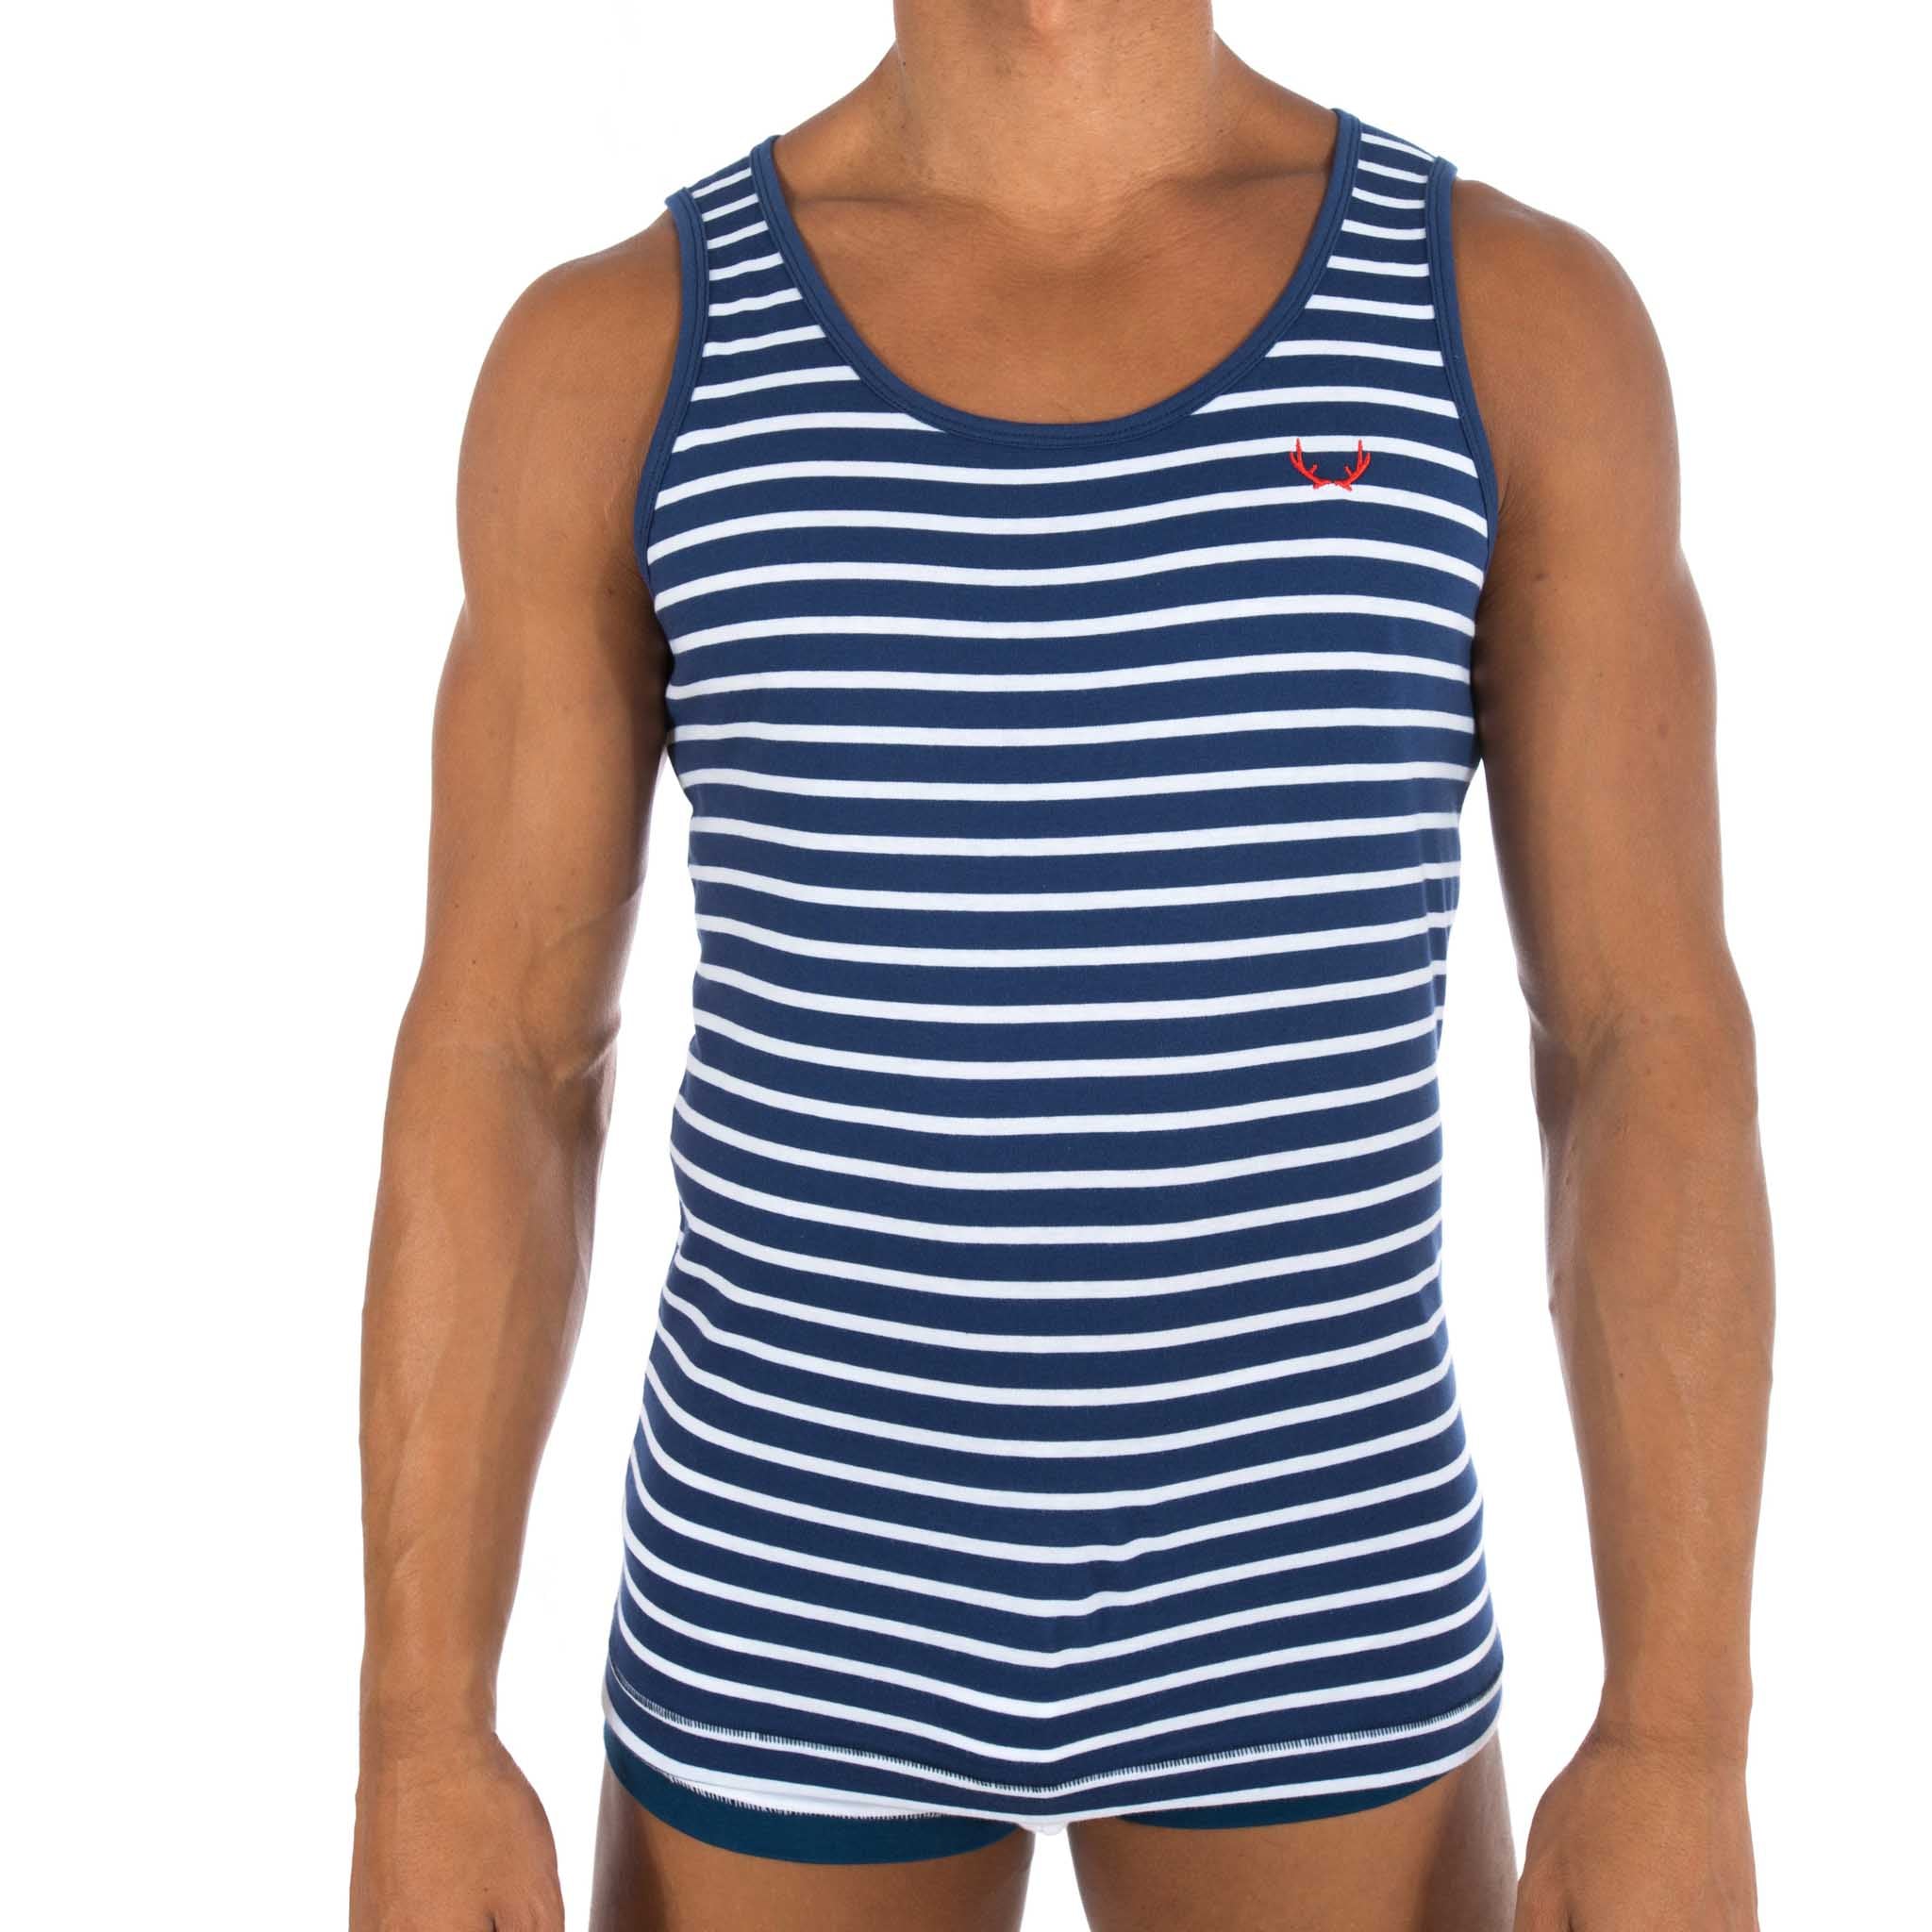 Navy colored organic cotton tank top/vest from Bluebuck